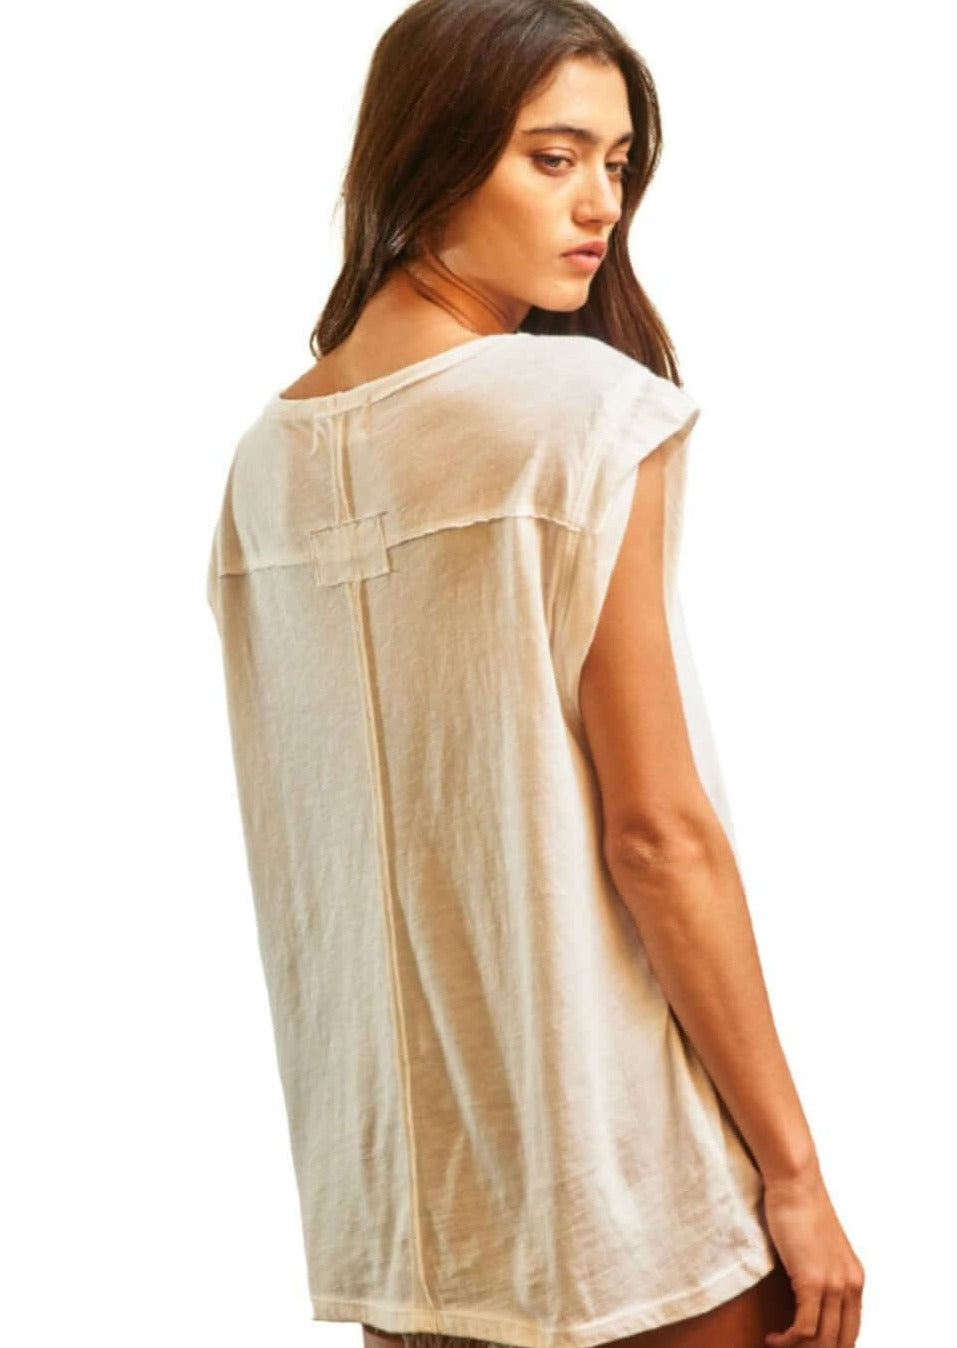 Bucket List Style# T1971 Ladies Muscle Sleeve Solid Jersey White Cotton Tee with Crew neckline & Raw Edge Details | Made in USA | Classy Cozy Cool Women's Made in America Clothing Boutique